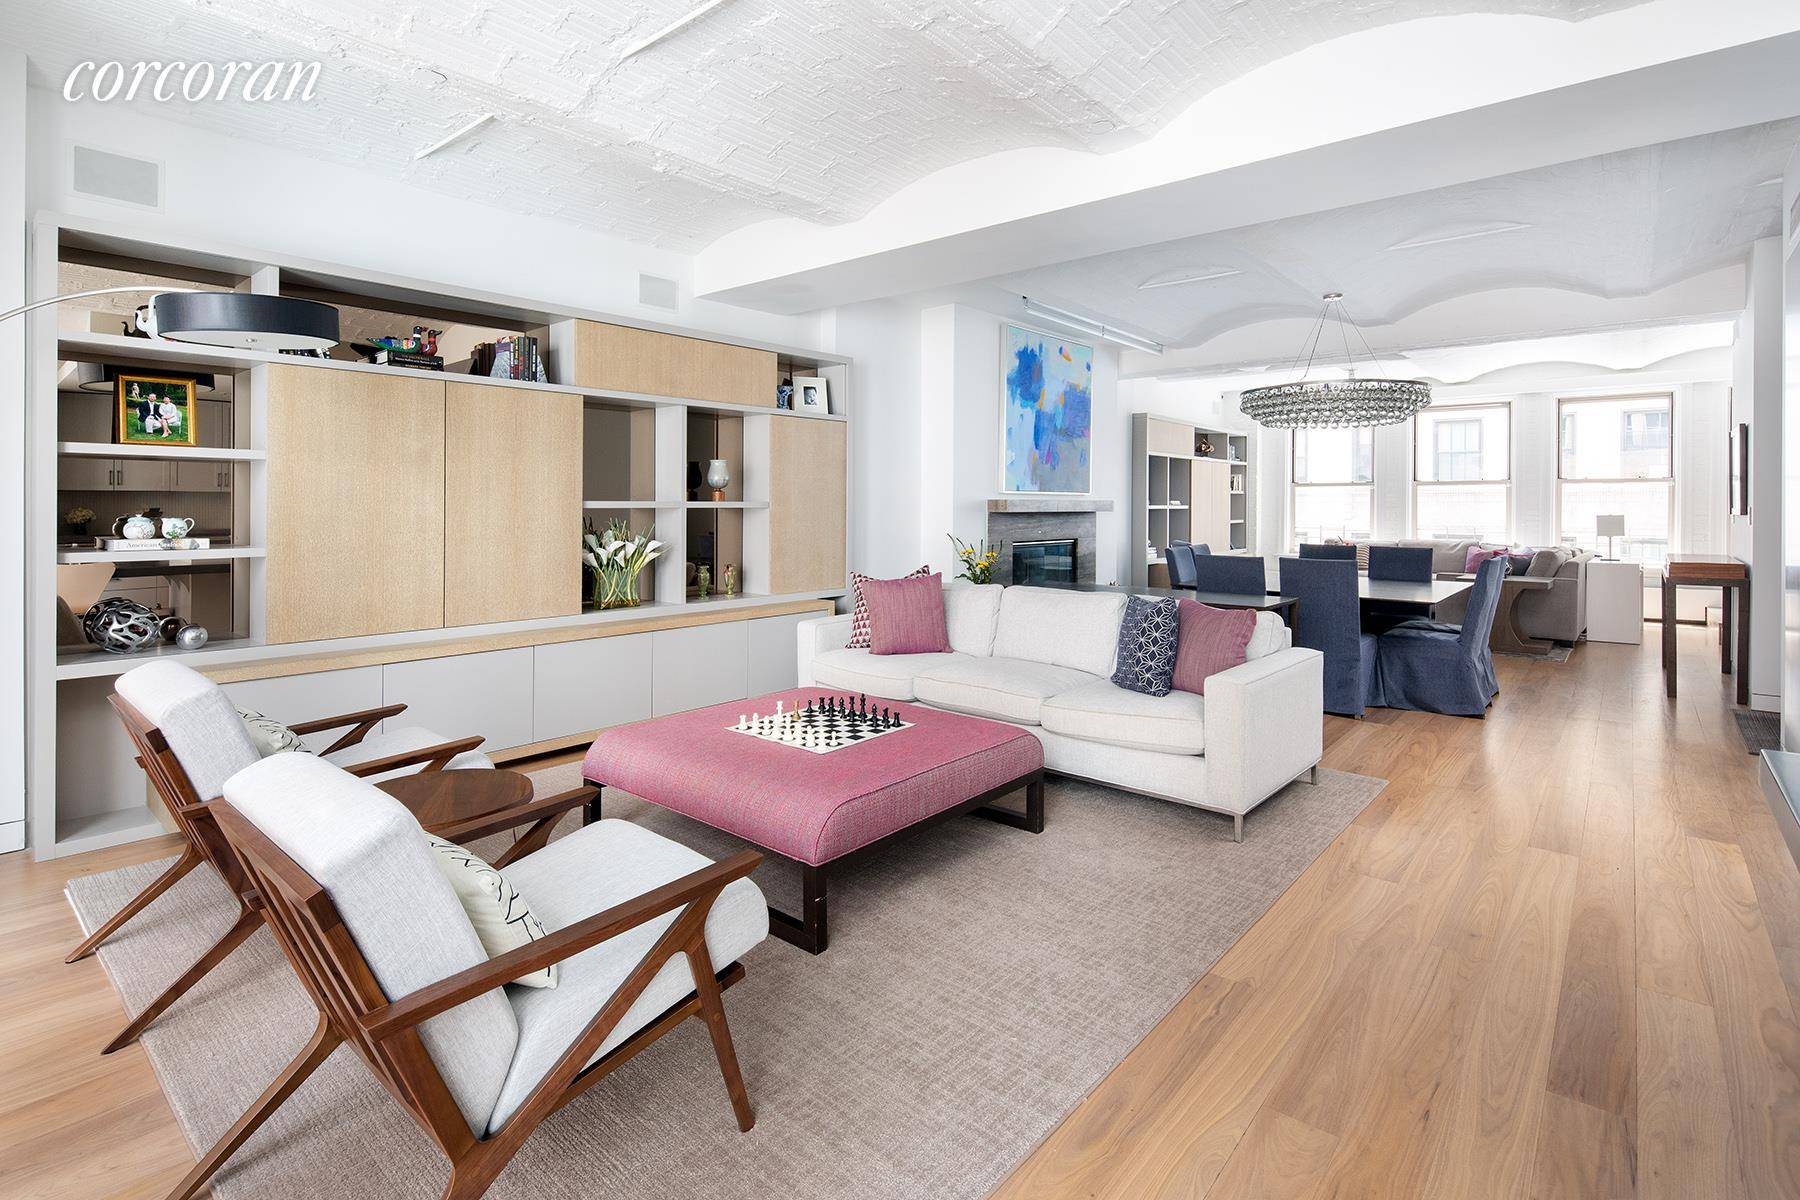 The Boutique BAZZINI BUILDING 21 JAY STREET Condominium, located in the heart of TriBeCa, has all the charm of a small private building with only 9 unique residences, the architectural ...